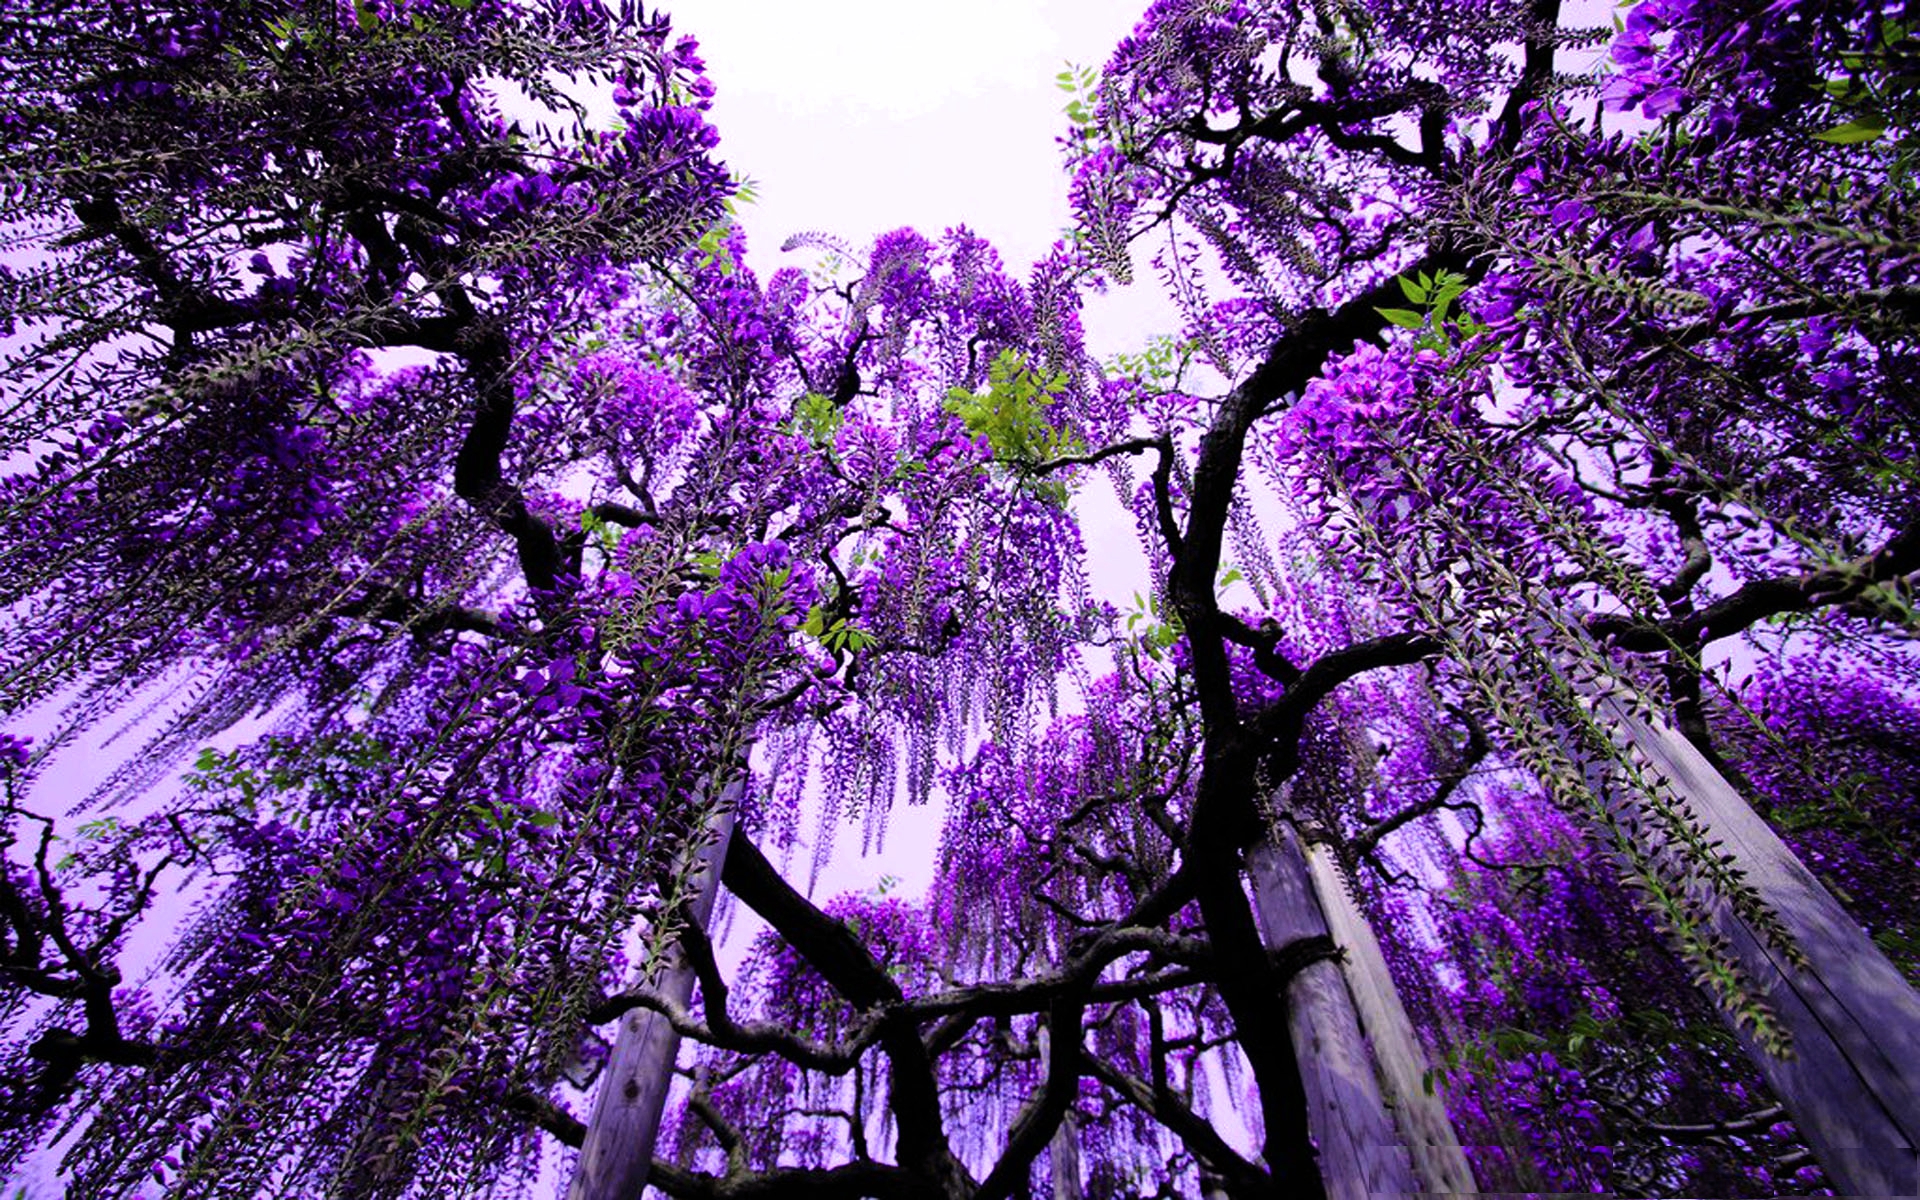 Purple flowers in the trees - Abstract wallpaper